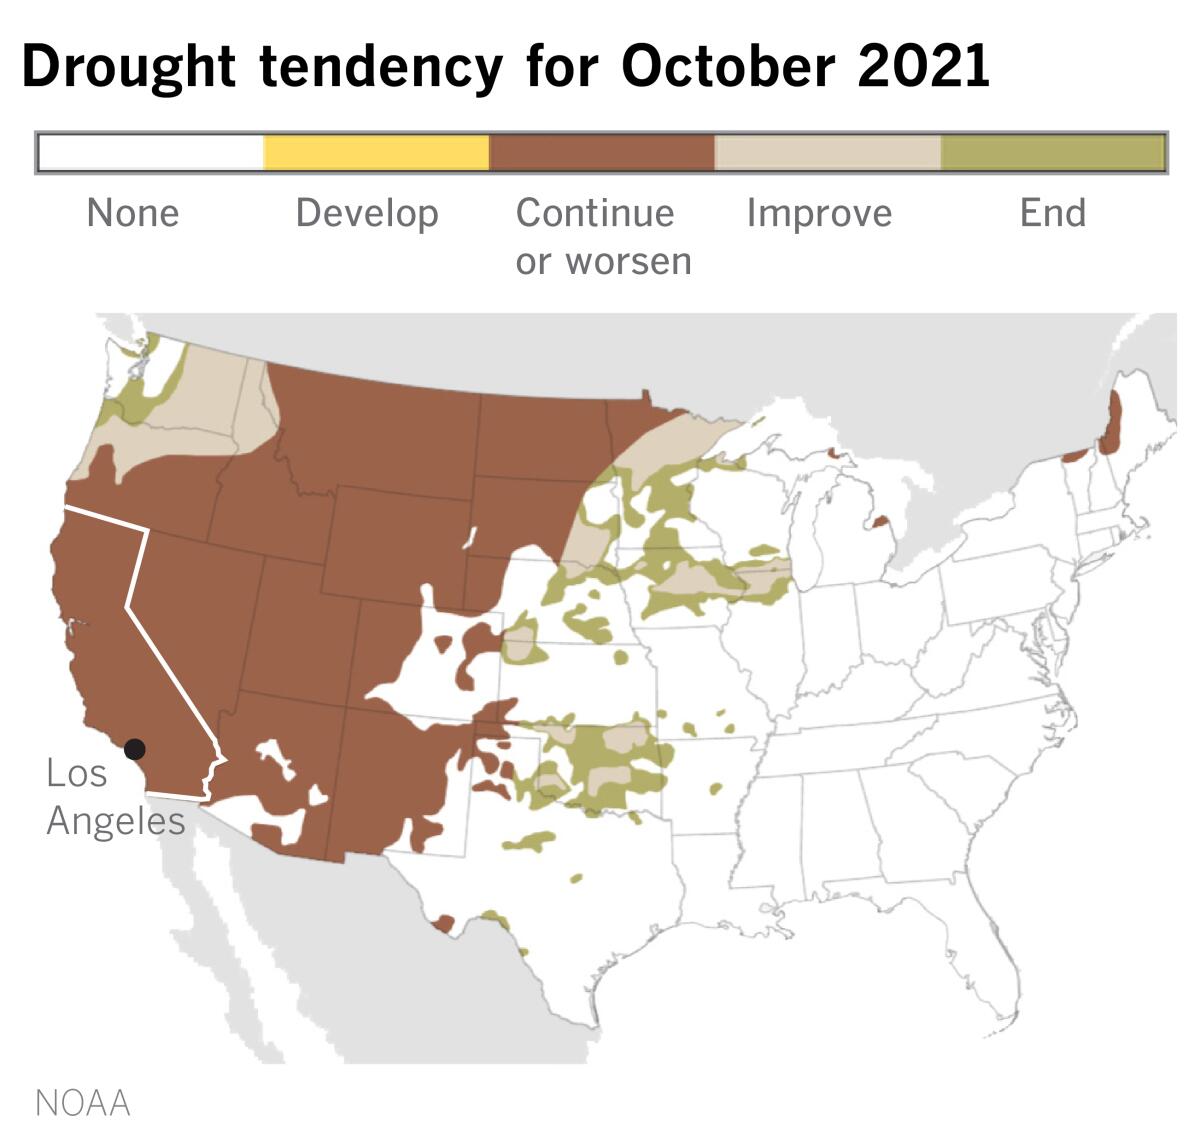 A map showing drought tendency in the U.S. for October.